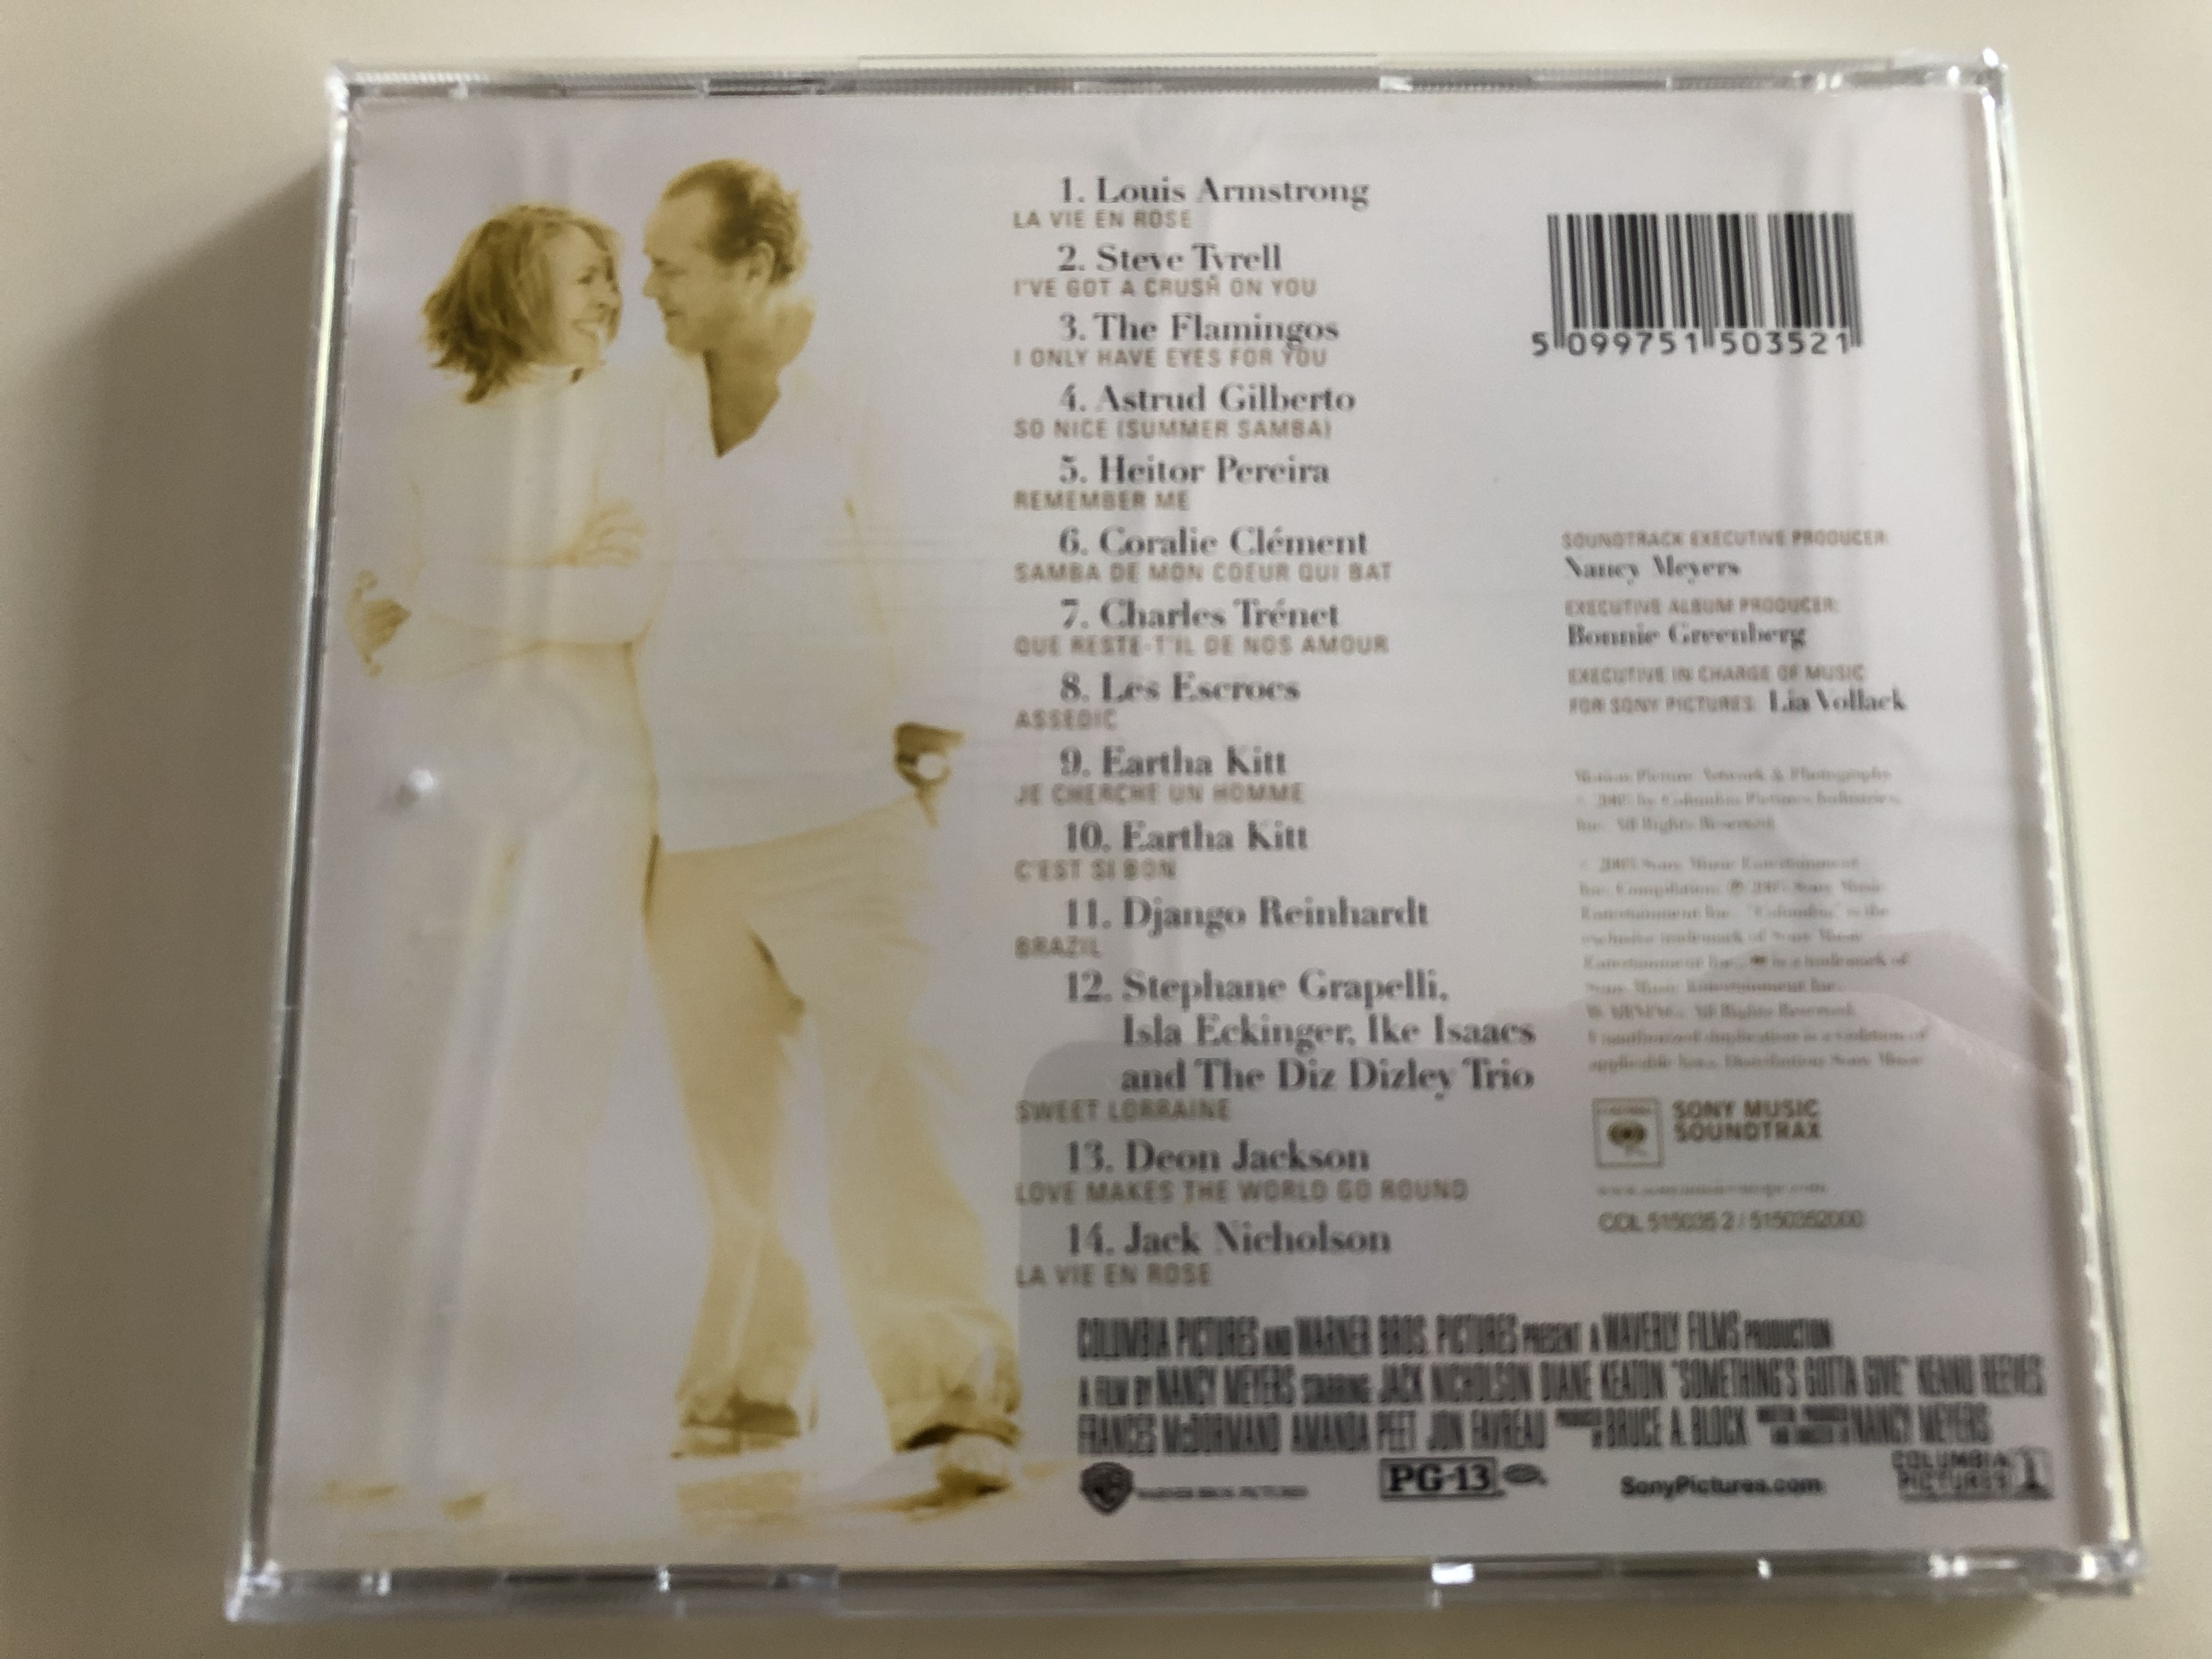 something-s-gotta-give-jack-nicholson-diane-keaton-music-from-the-motion-picture-a-film-by-nancy-meyers-audio-cd-2003-col-515035-2-3-.jpg